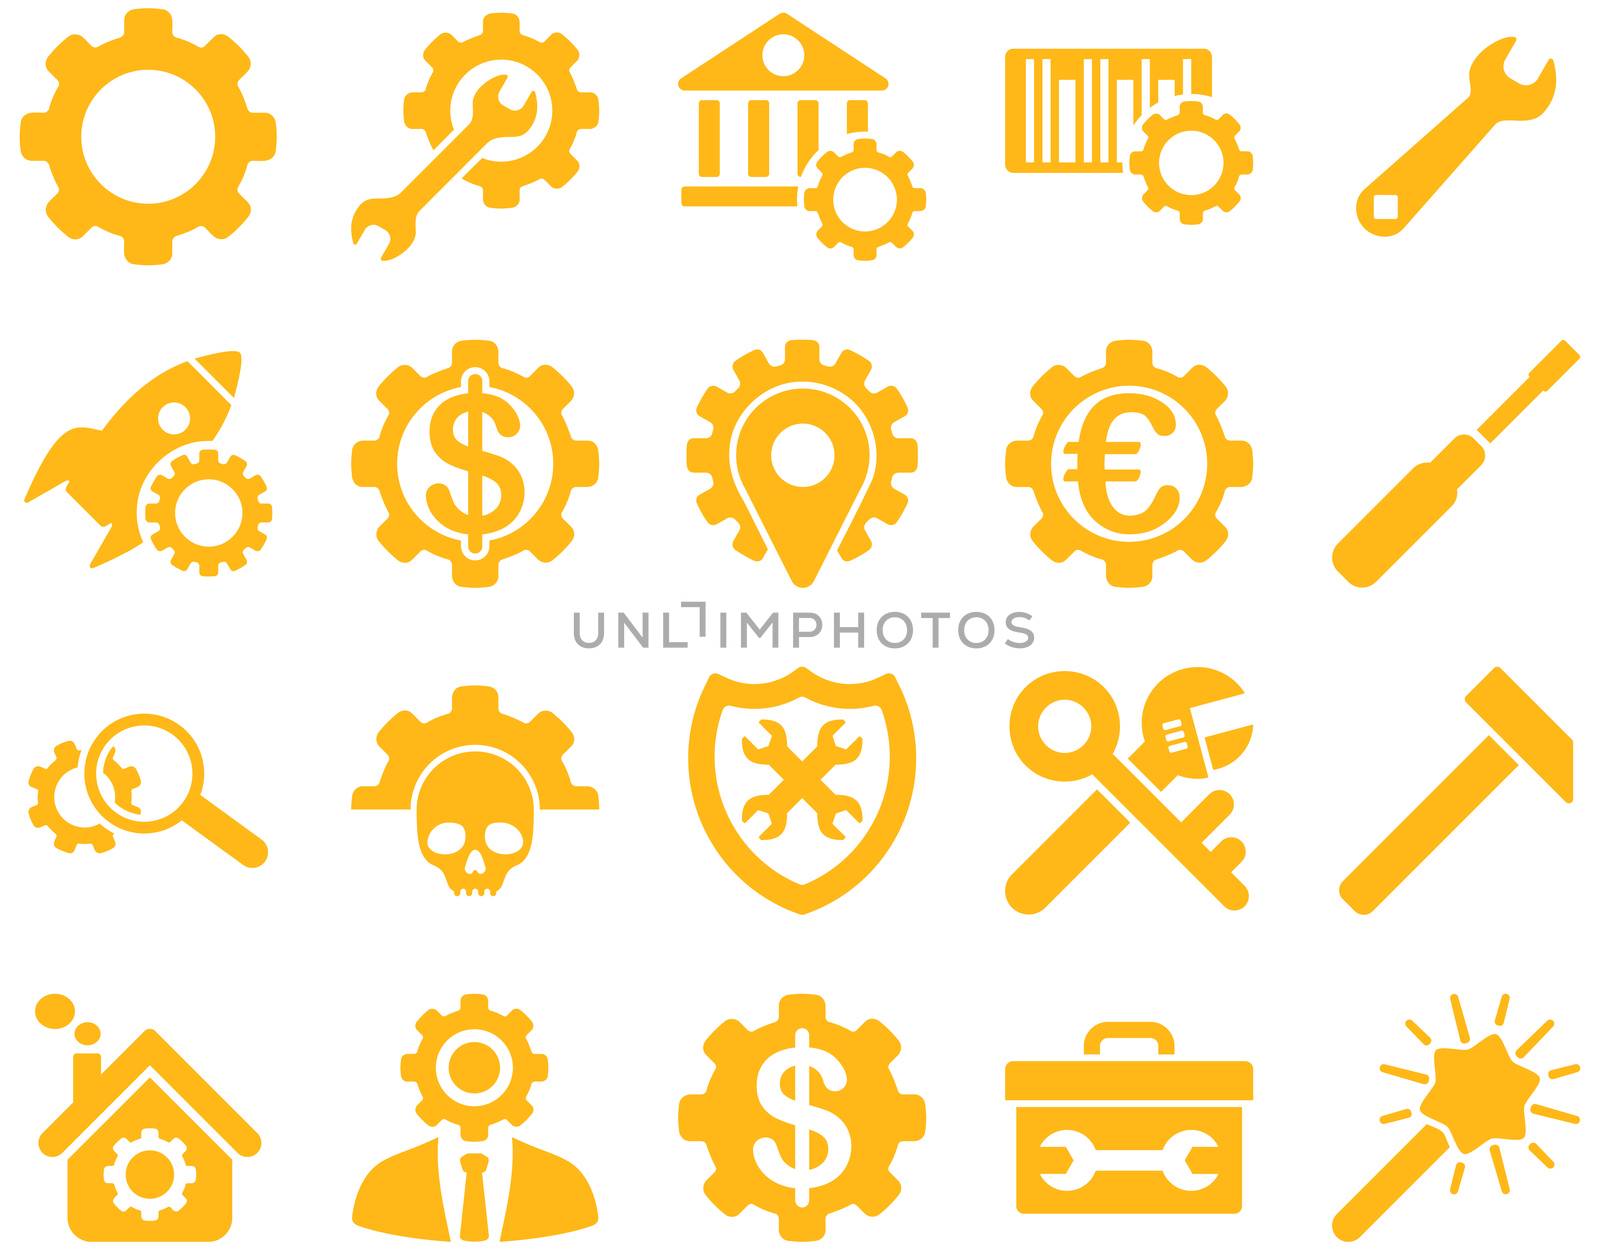 Settings and Tools Icons. Glyph set style is flat images, yellow color, isolated on a white background.